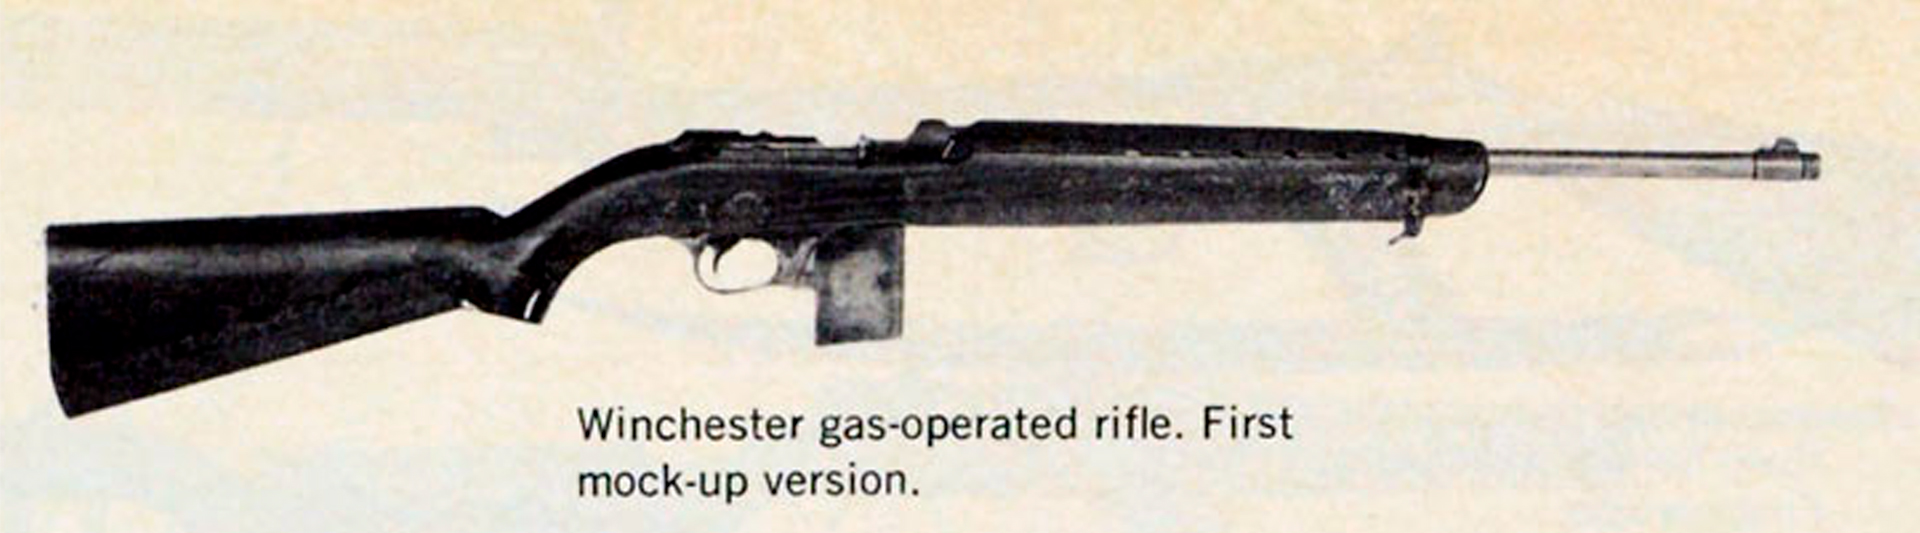 Winchester M1 Carbine gas-operated rifle first example right-side view